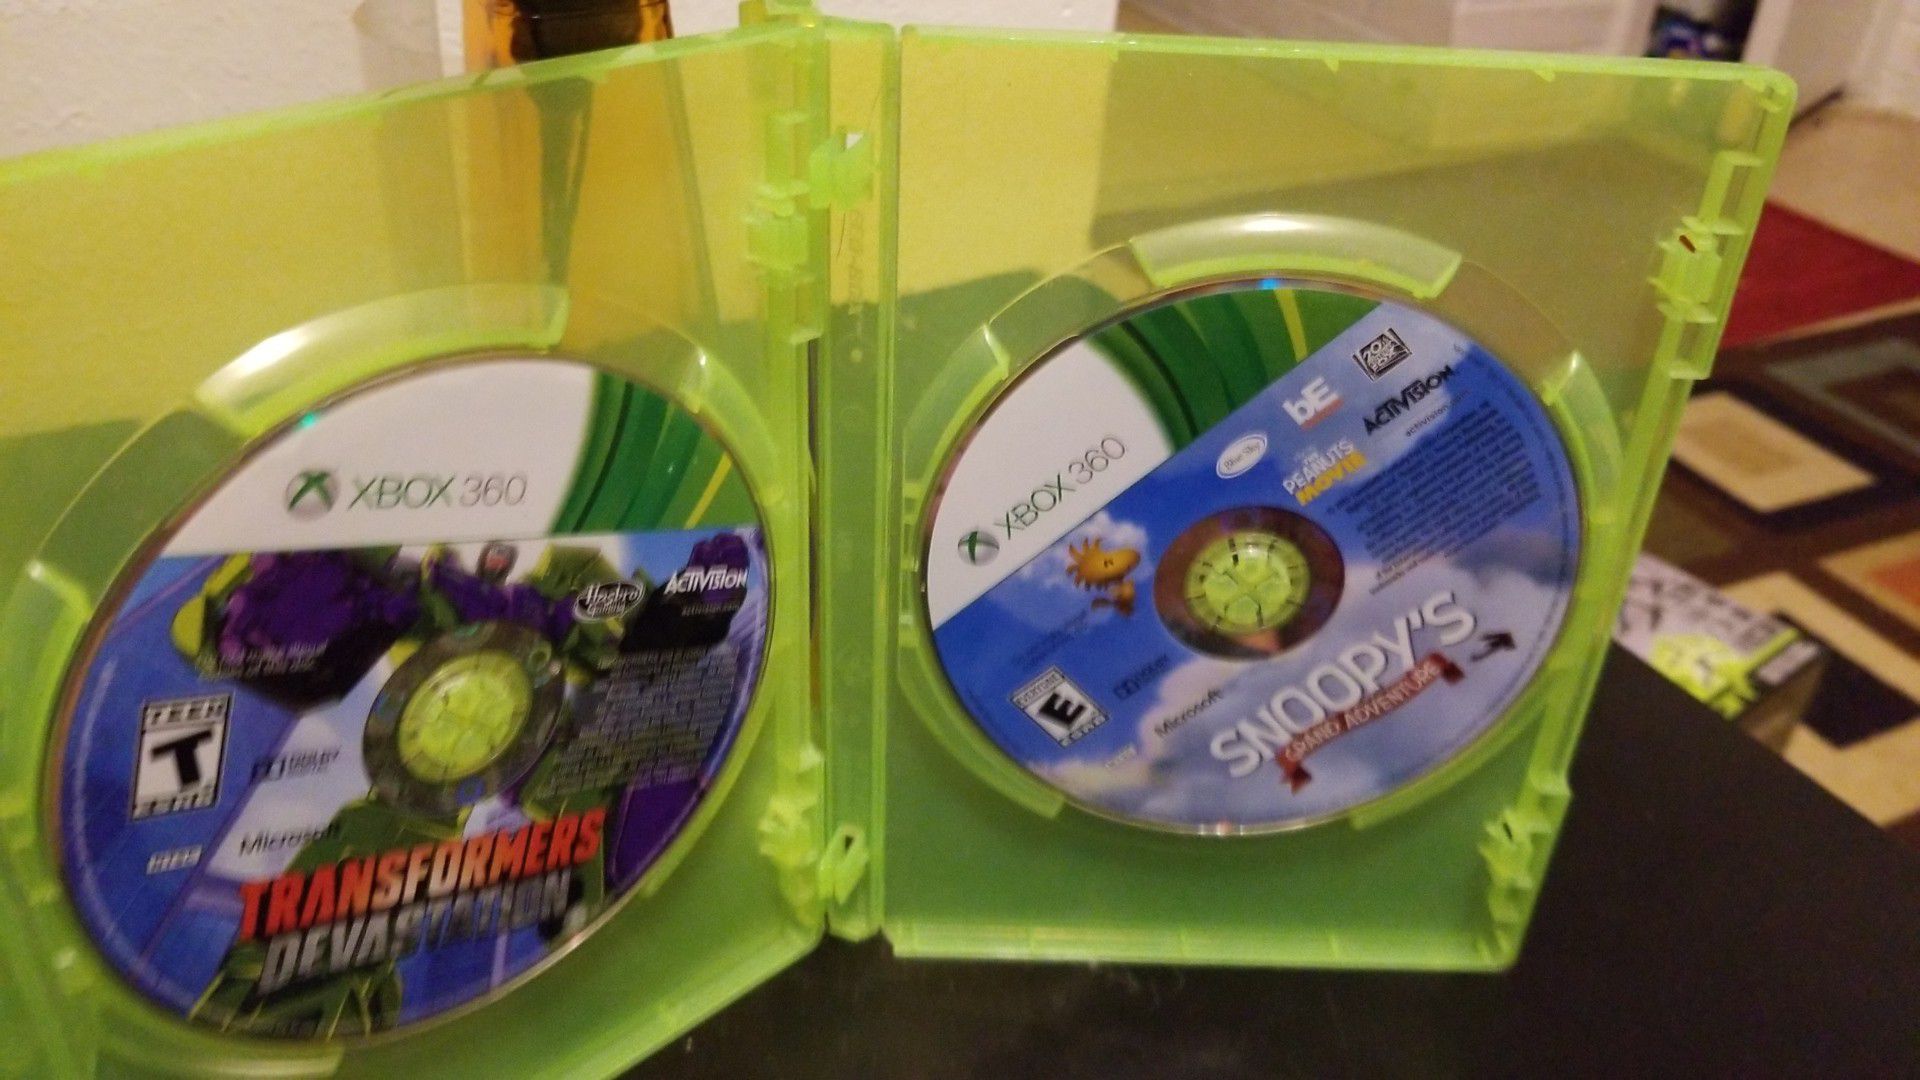 Transformer and snoopy game (Xbox 360)